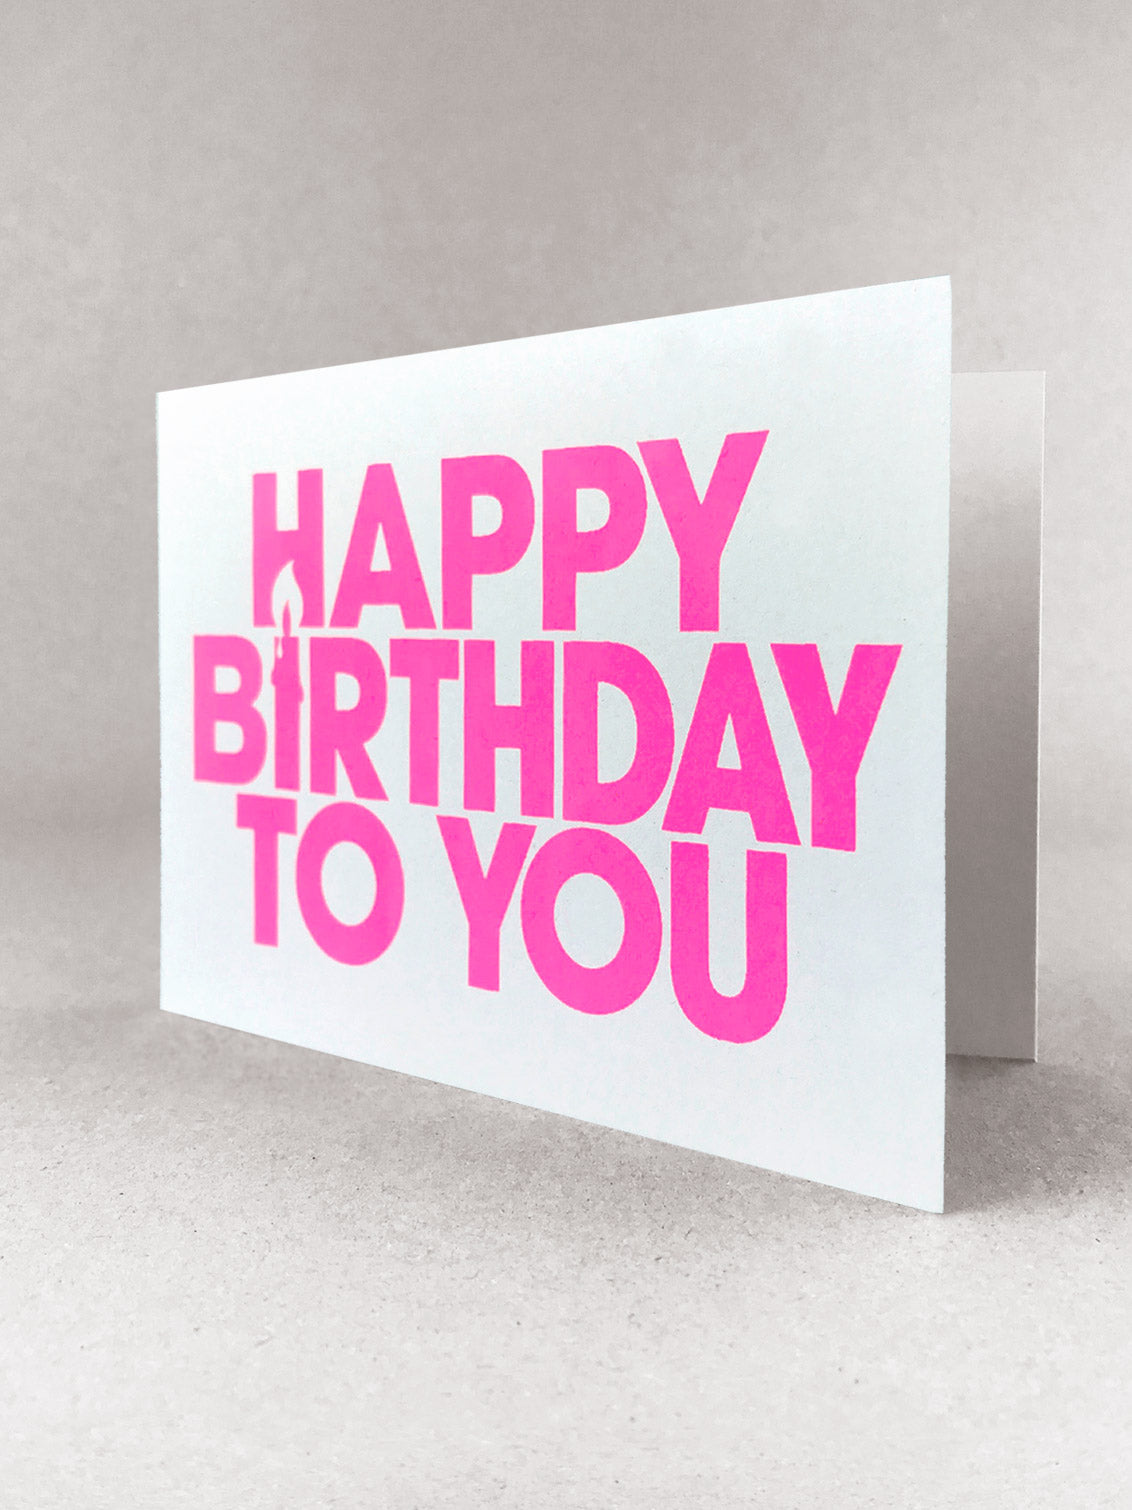 Happy Birthday to You landscape greetings card. The I of Birthday is a candle using negative space. A ¾ view to show the plain inner. Printed in capital letters, simple font printed in neon pink ink on a white card made by Salty's Studio.